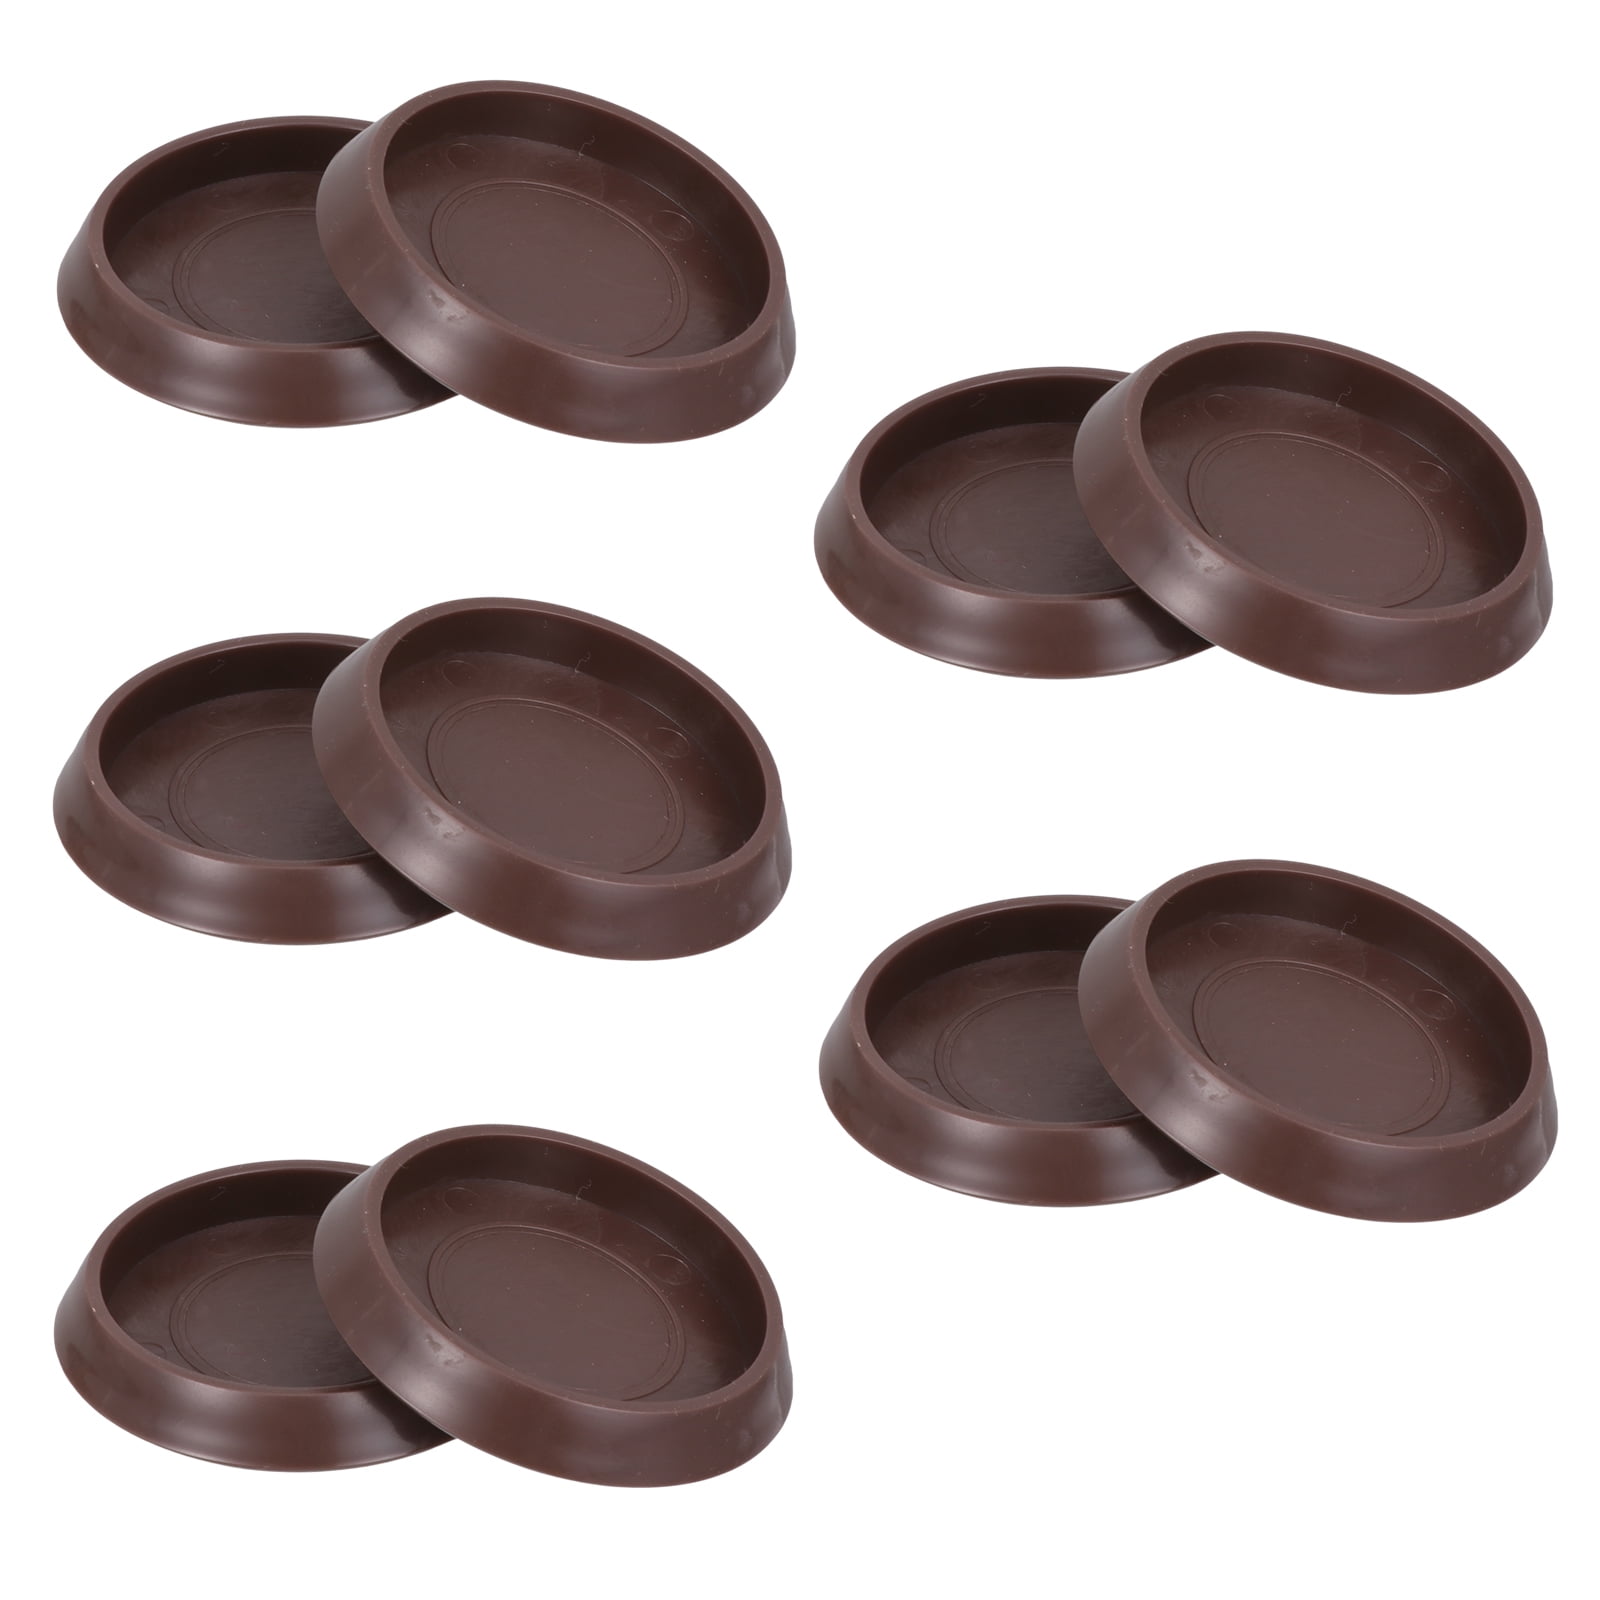 FELT BACKED 8 PIECES  x  LARGE BROWN CASTOR CUPS FLOOR GLIDES 